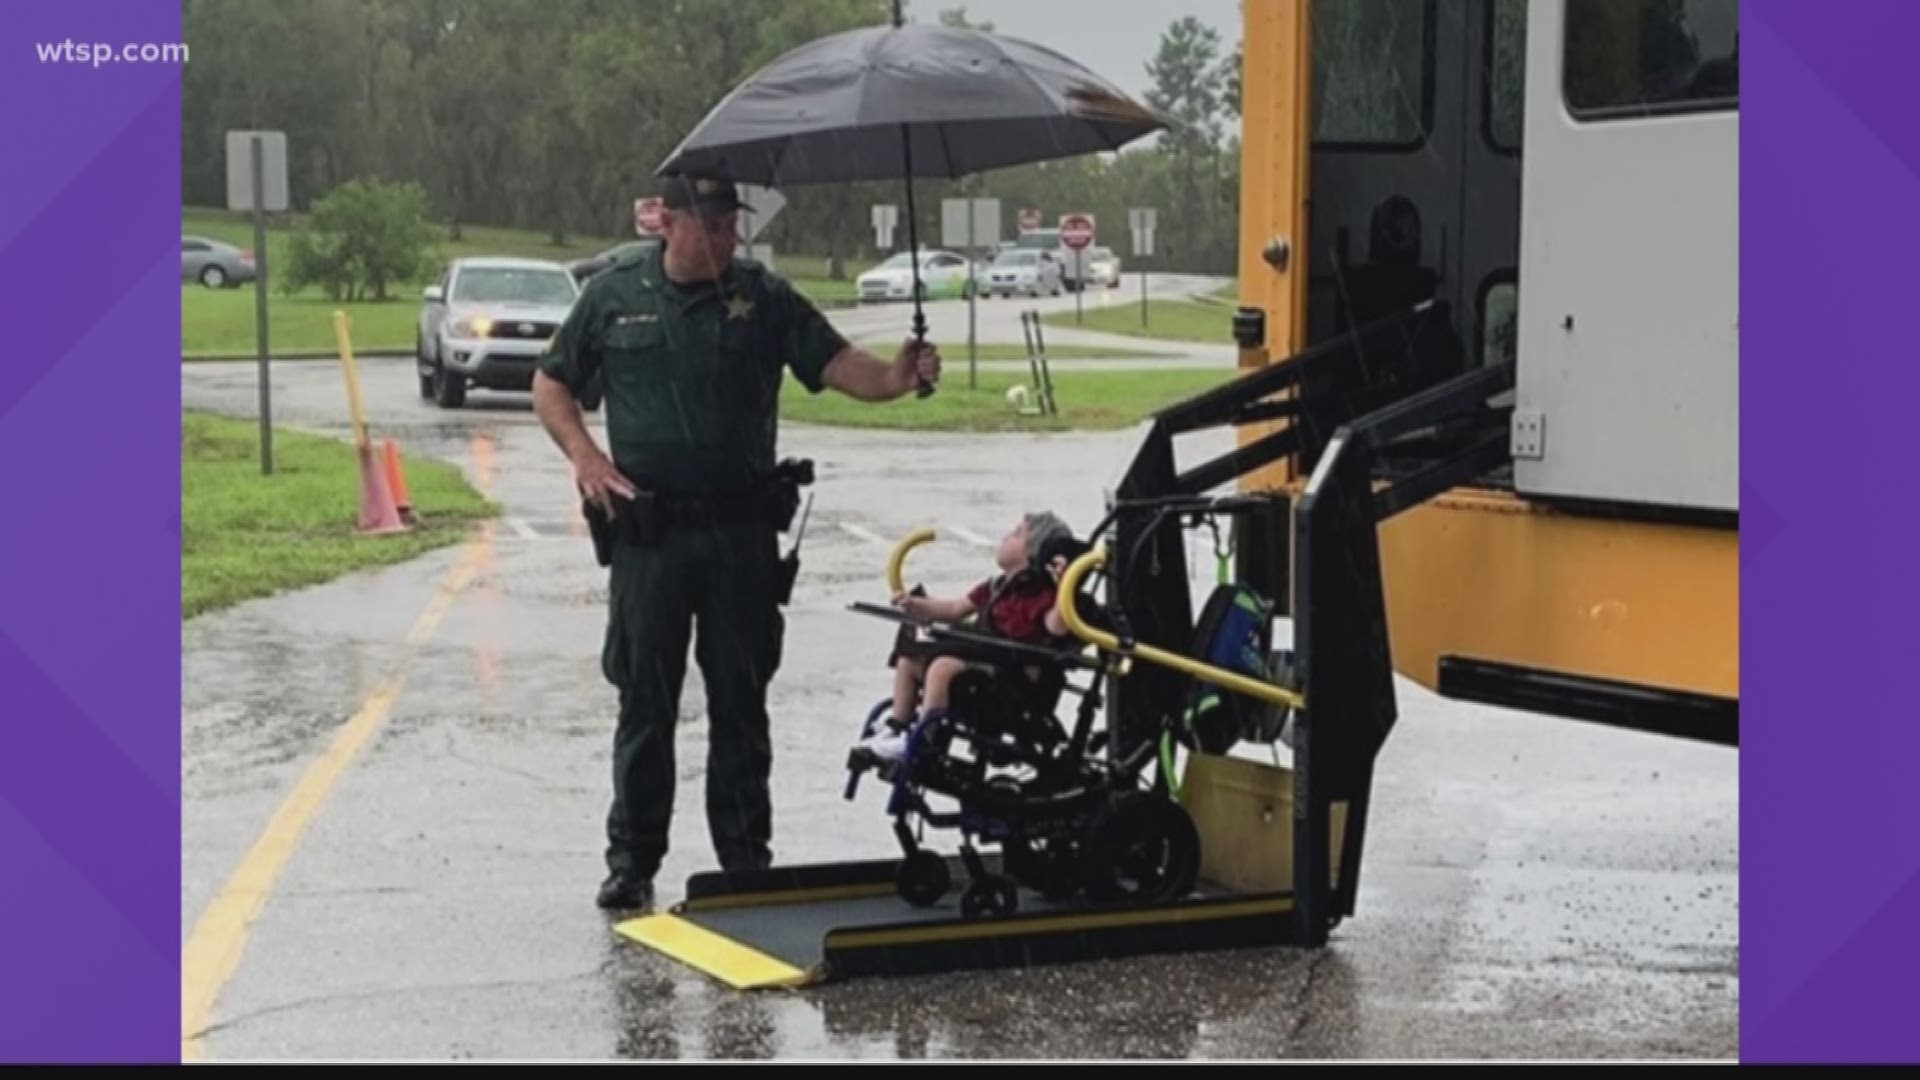 The Citrus County Sheriff's Office shared a sweet photo to its Facebook page of a local school resource deputy helping a student avoid the rain while getting off the bus.

The photo shows the deputy holding an umbrella over a student in a wheelchair while being let off the school bus.

"Rain or shine - Our SRDs will be there for you," the sheriff's office said in the post. "Let's make this another great school week! Be safe."